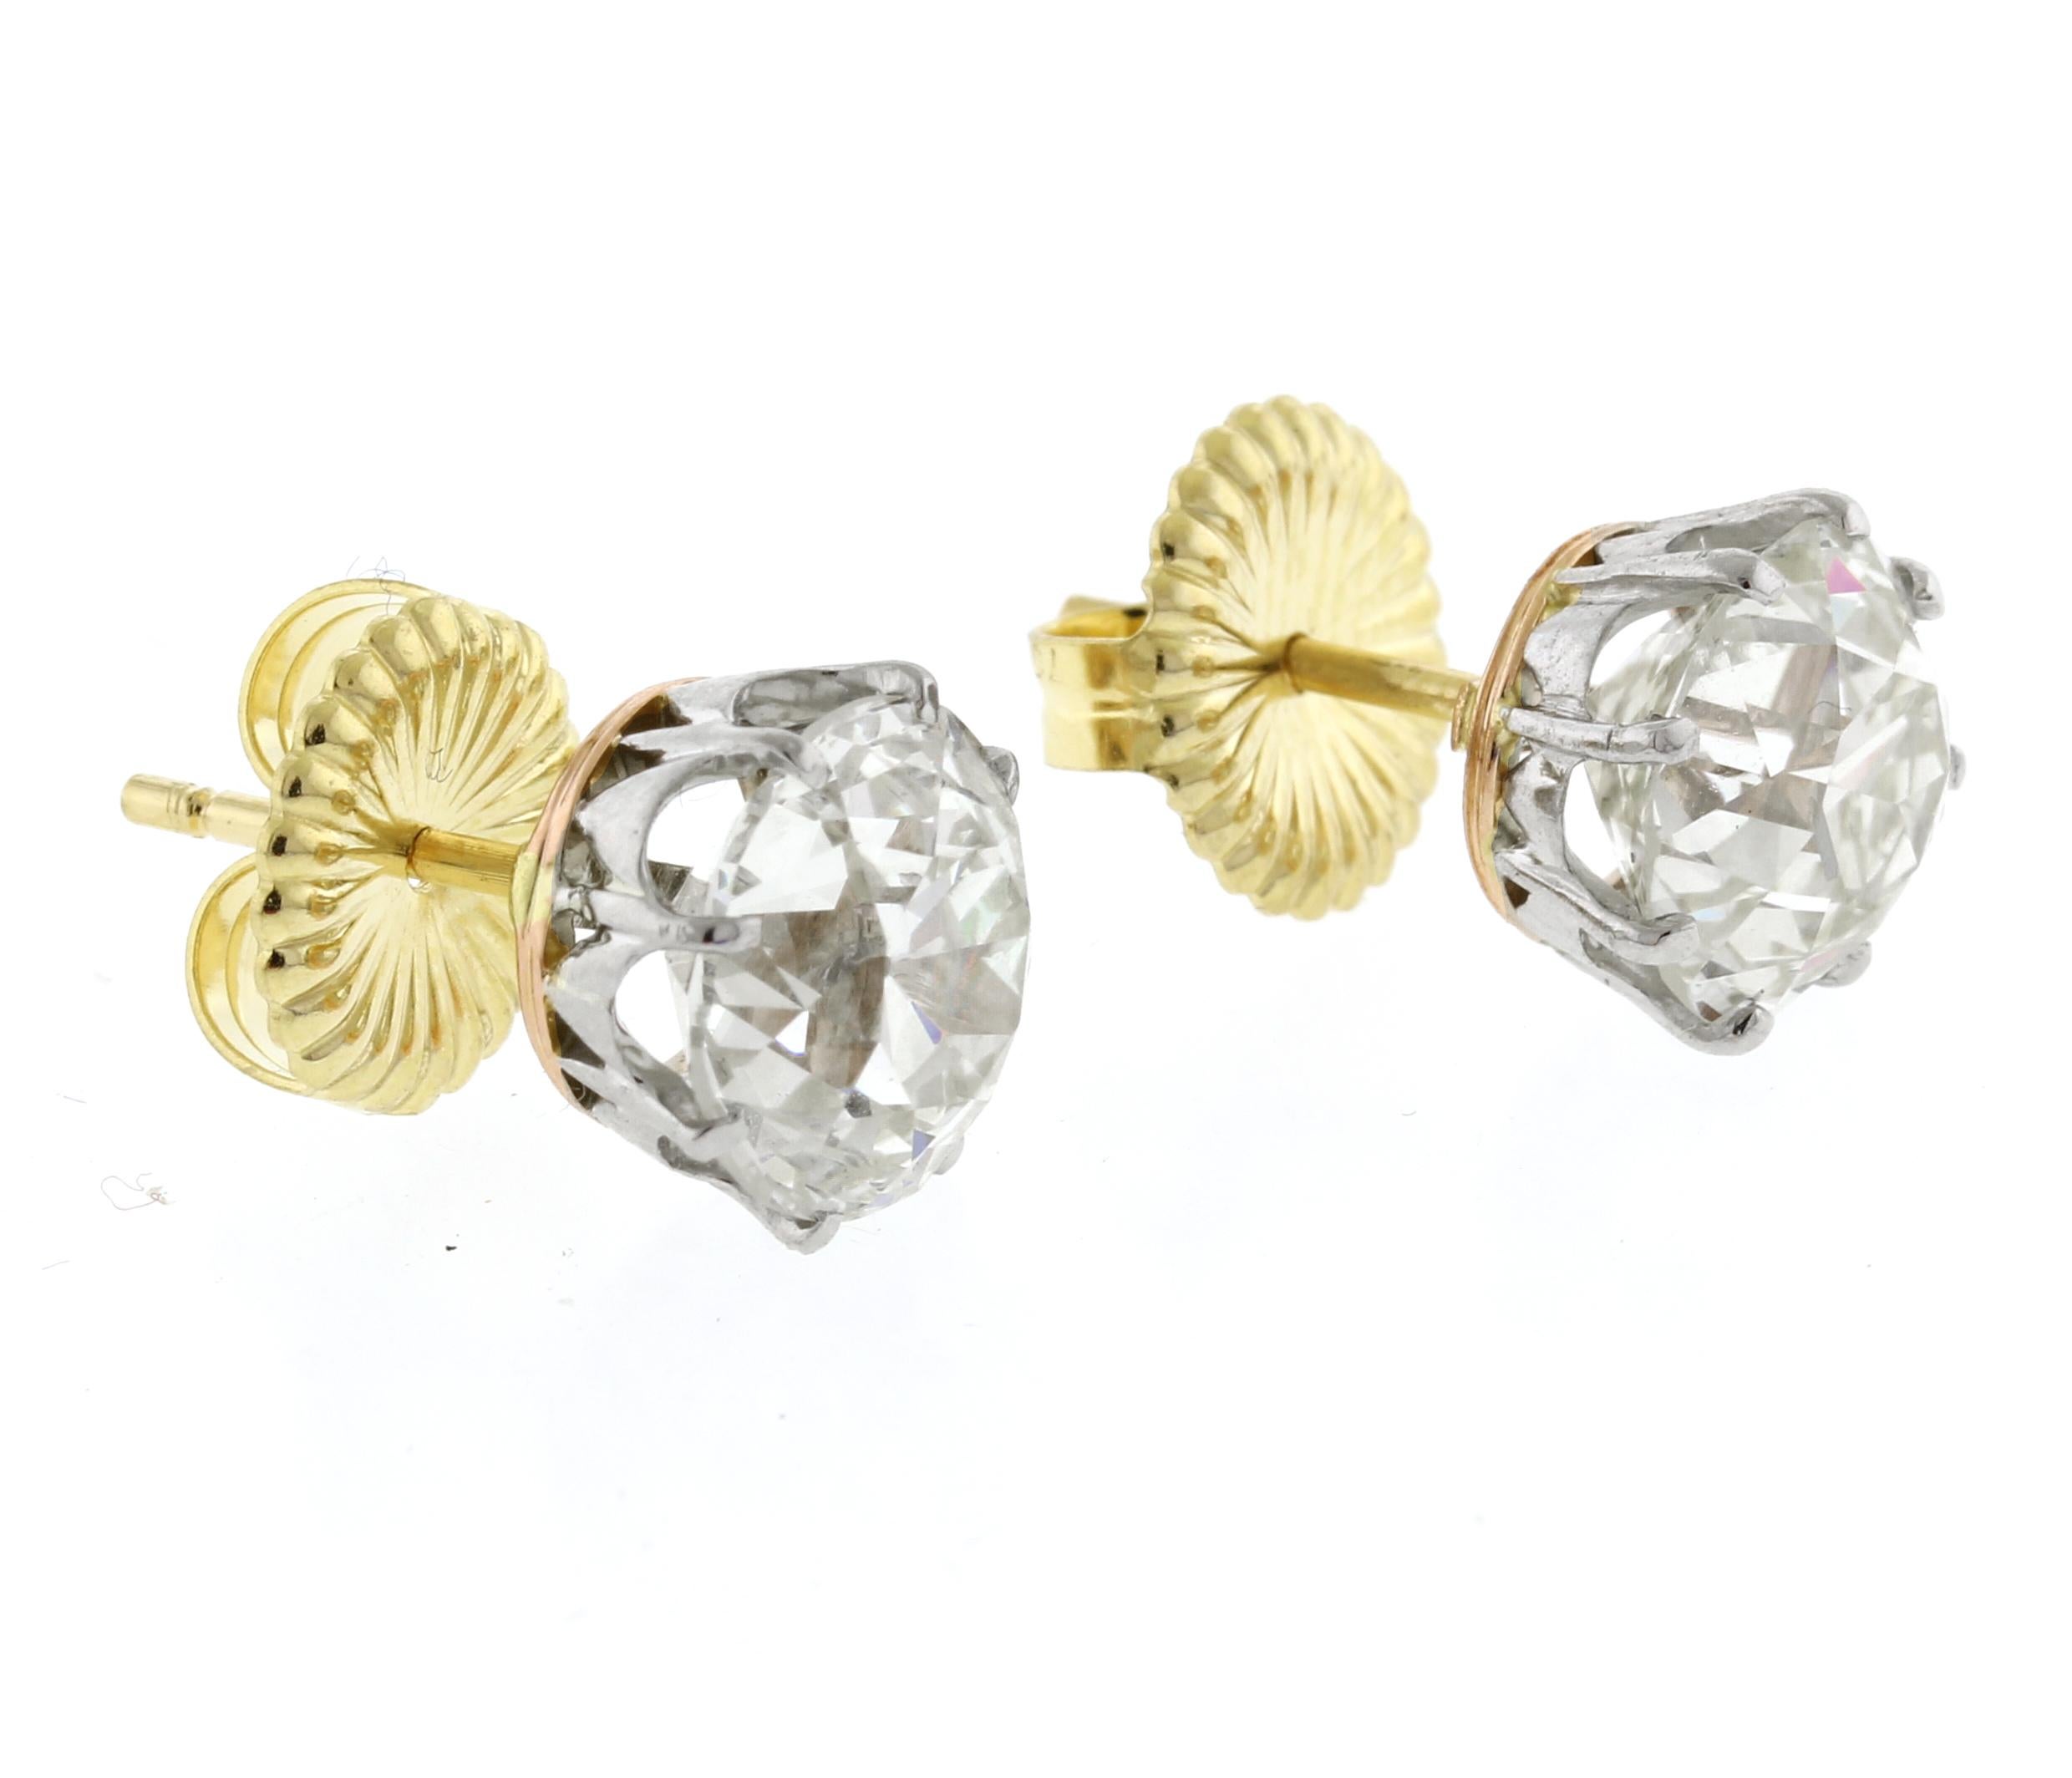 Experience timeless elegance with these exquisite diamond stud earrings, boasting a remarkable total carat weight of 6.21 carats. Crafted with the utmost precision, these earrings feature settings of 18-karat gold and platinum, merging tradition and